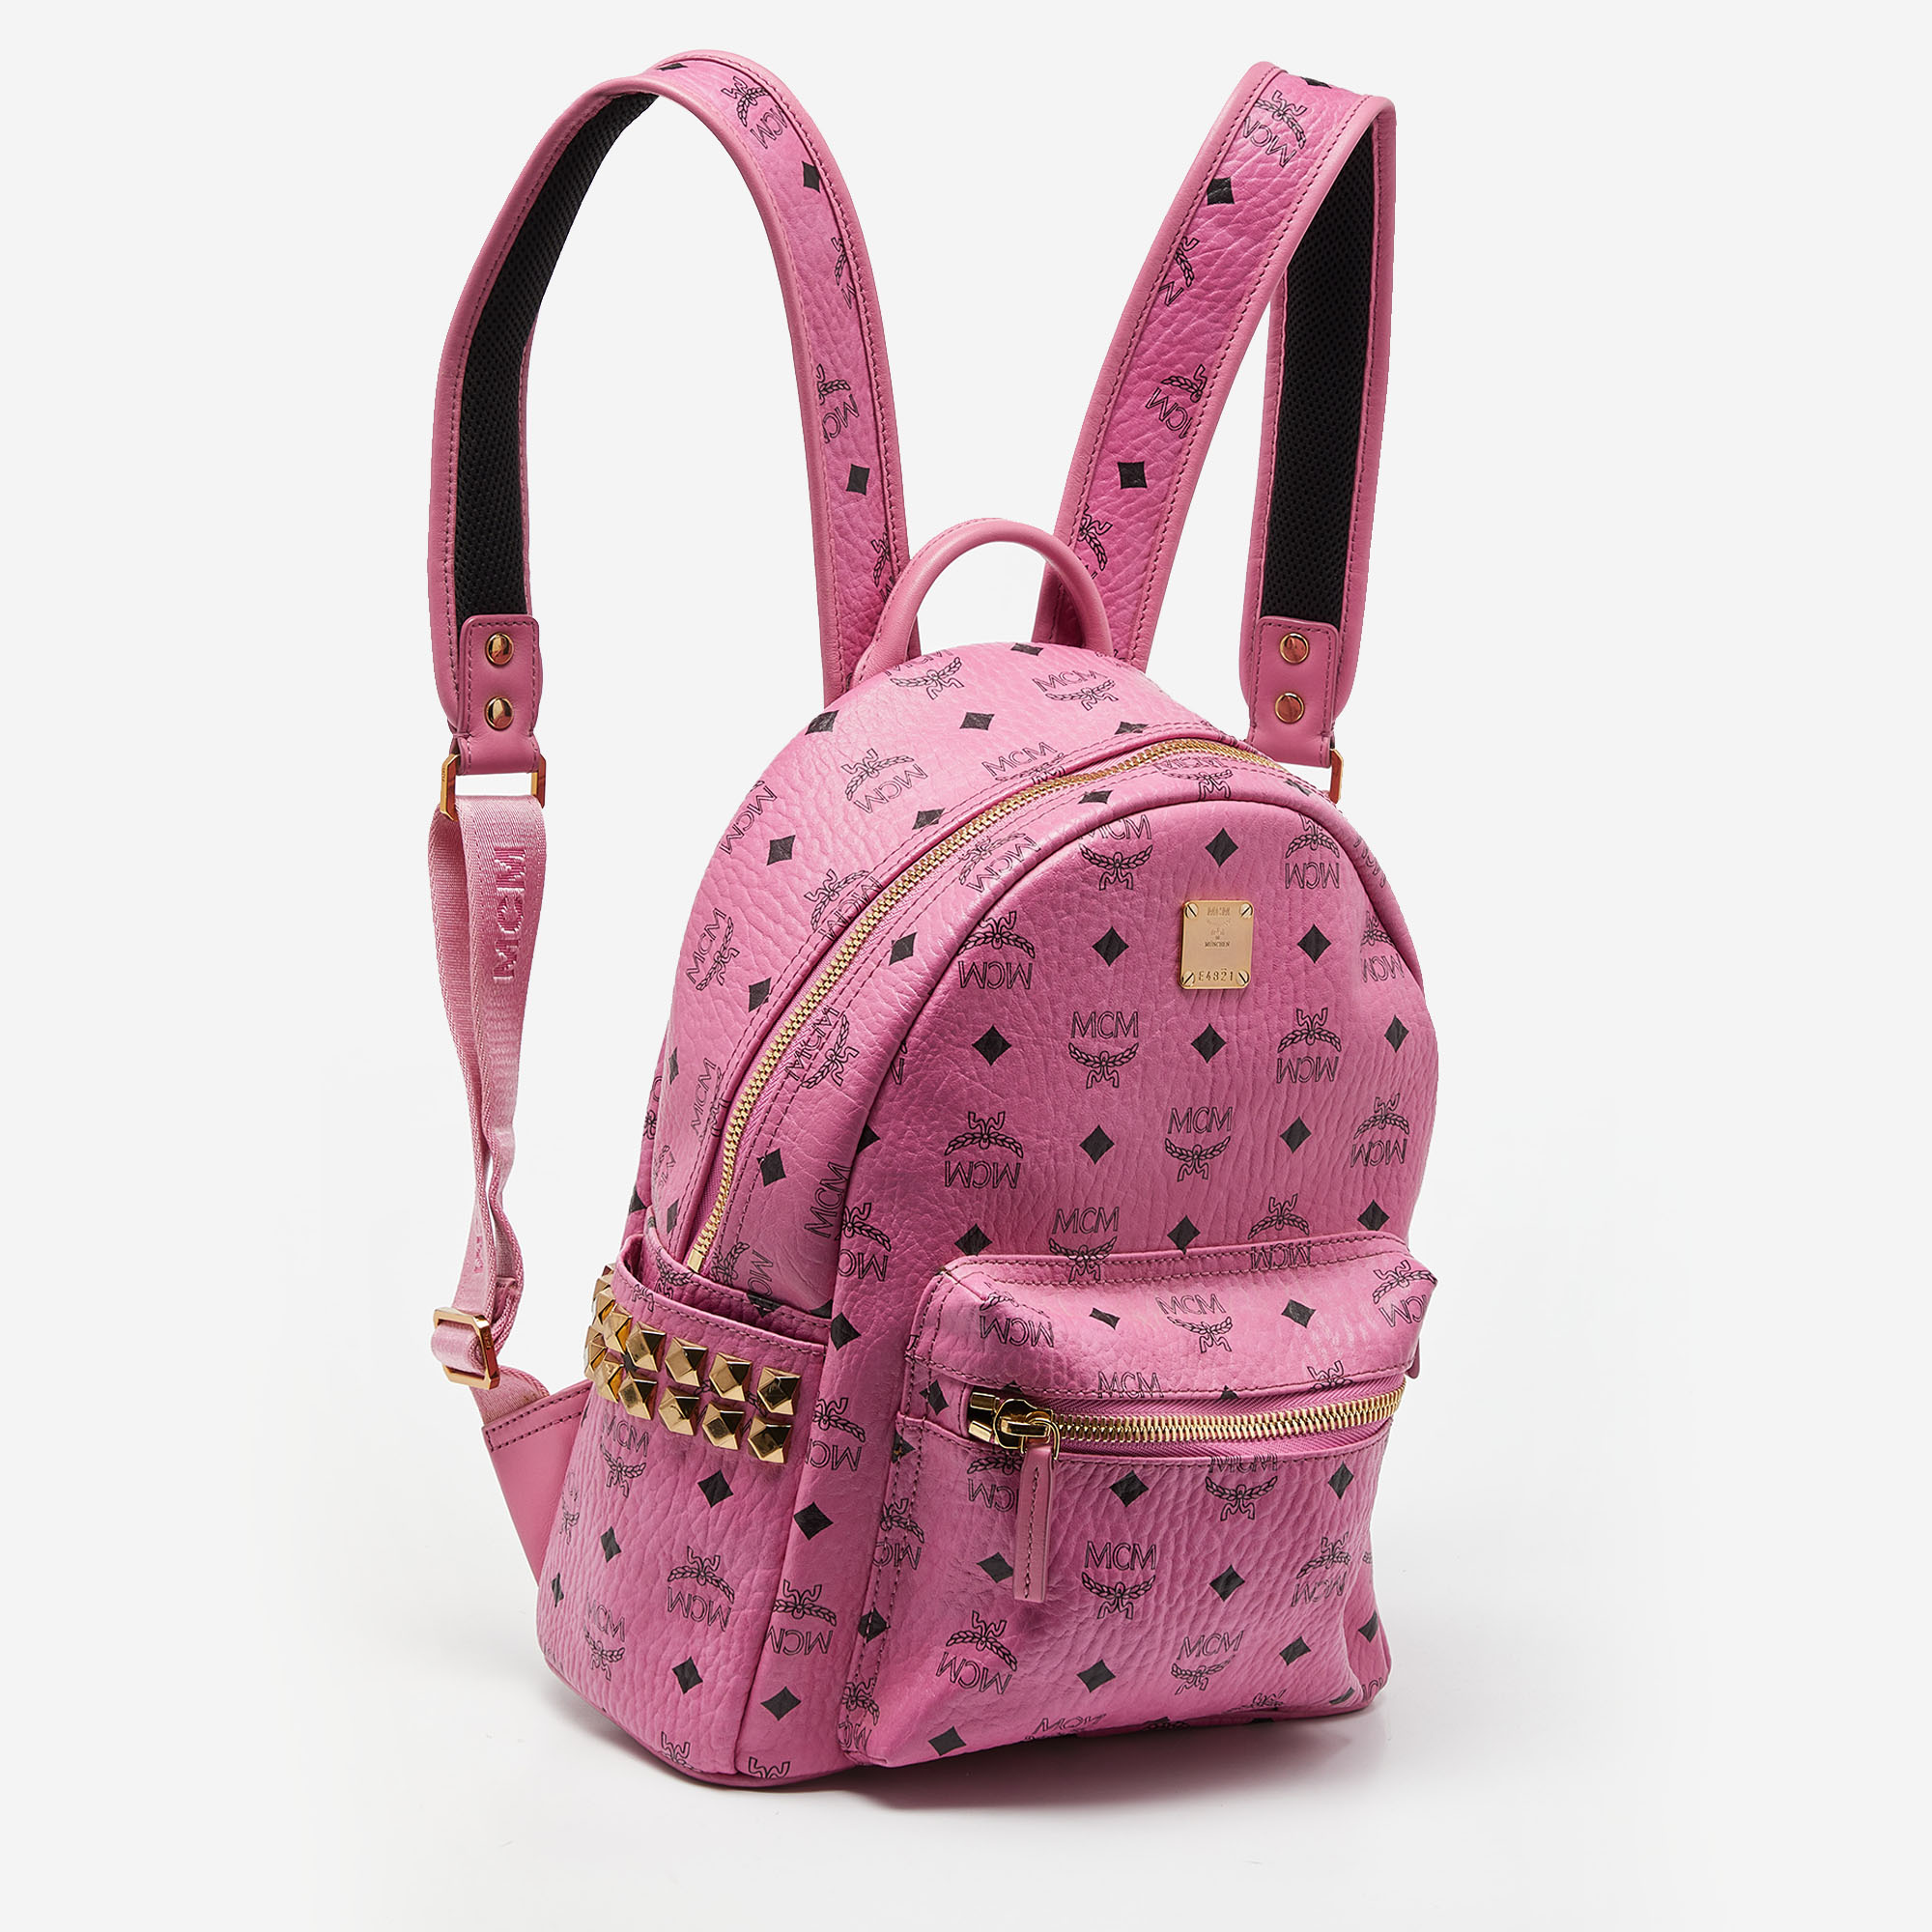 MCM Pink Visetos Coated Canvas Small Studs Stark Backpack